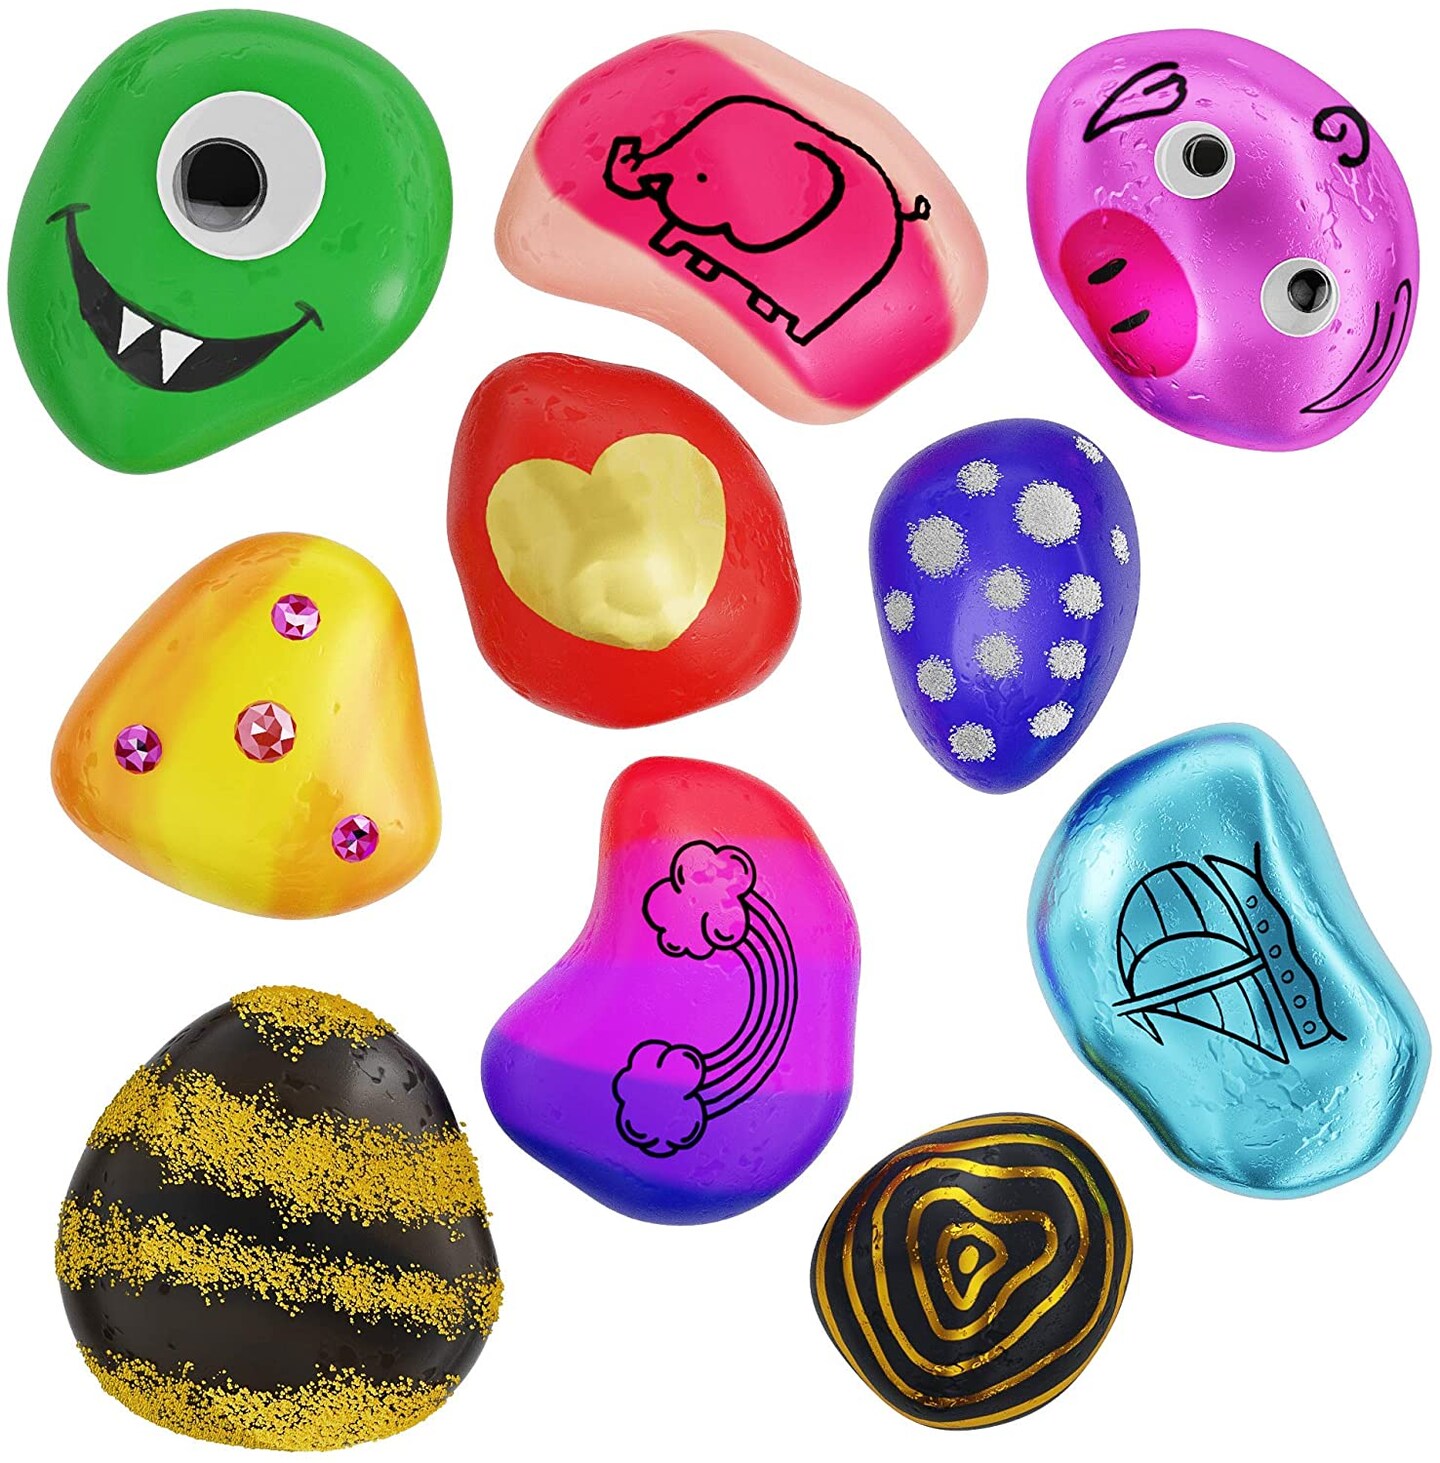 Dan&#x26;Darci Rock Painting Kit for Kids - Arts and Crafts for Girls &#x26; Boys Ages 6-12 - Craft Kits Art Set - Supplies for Painting Rocks - Best Tween Paint Gift